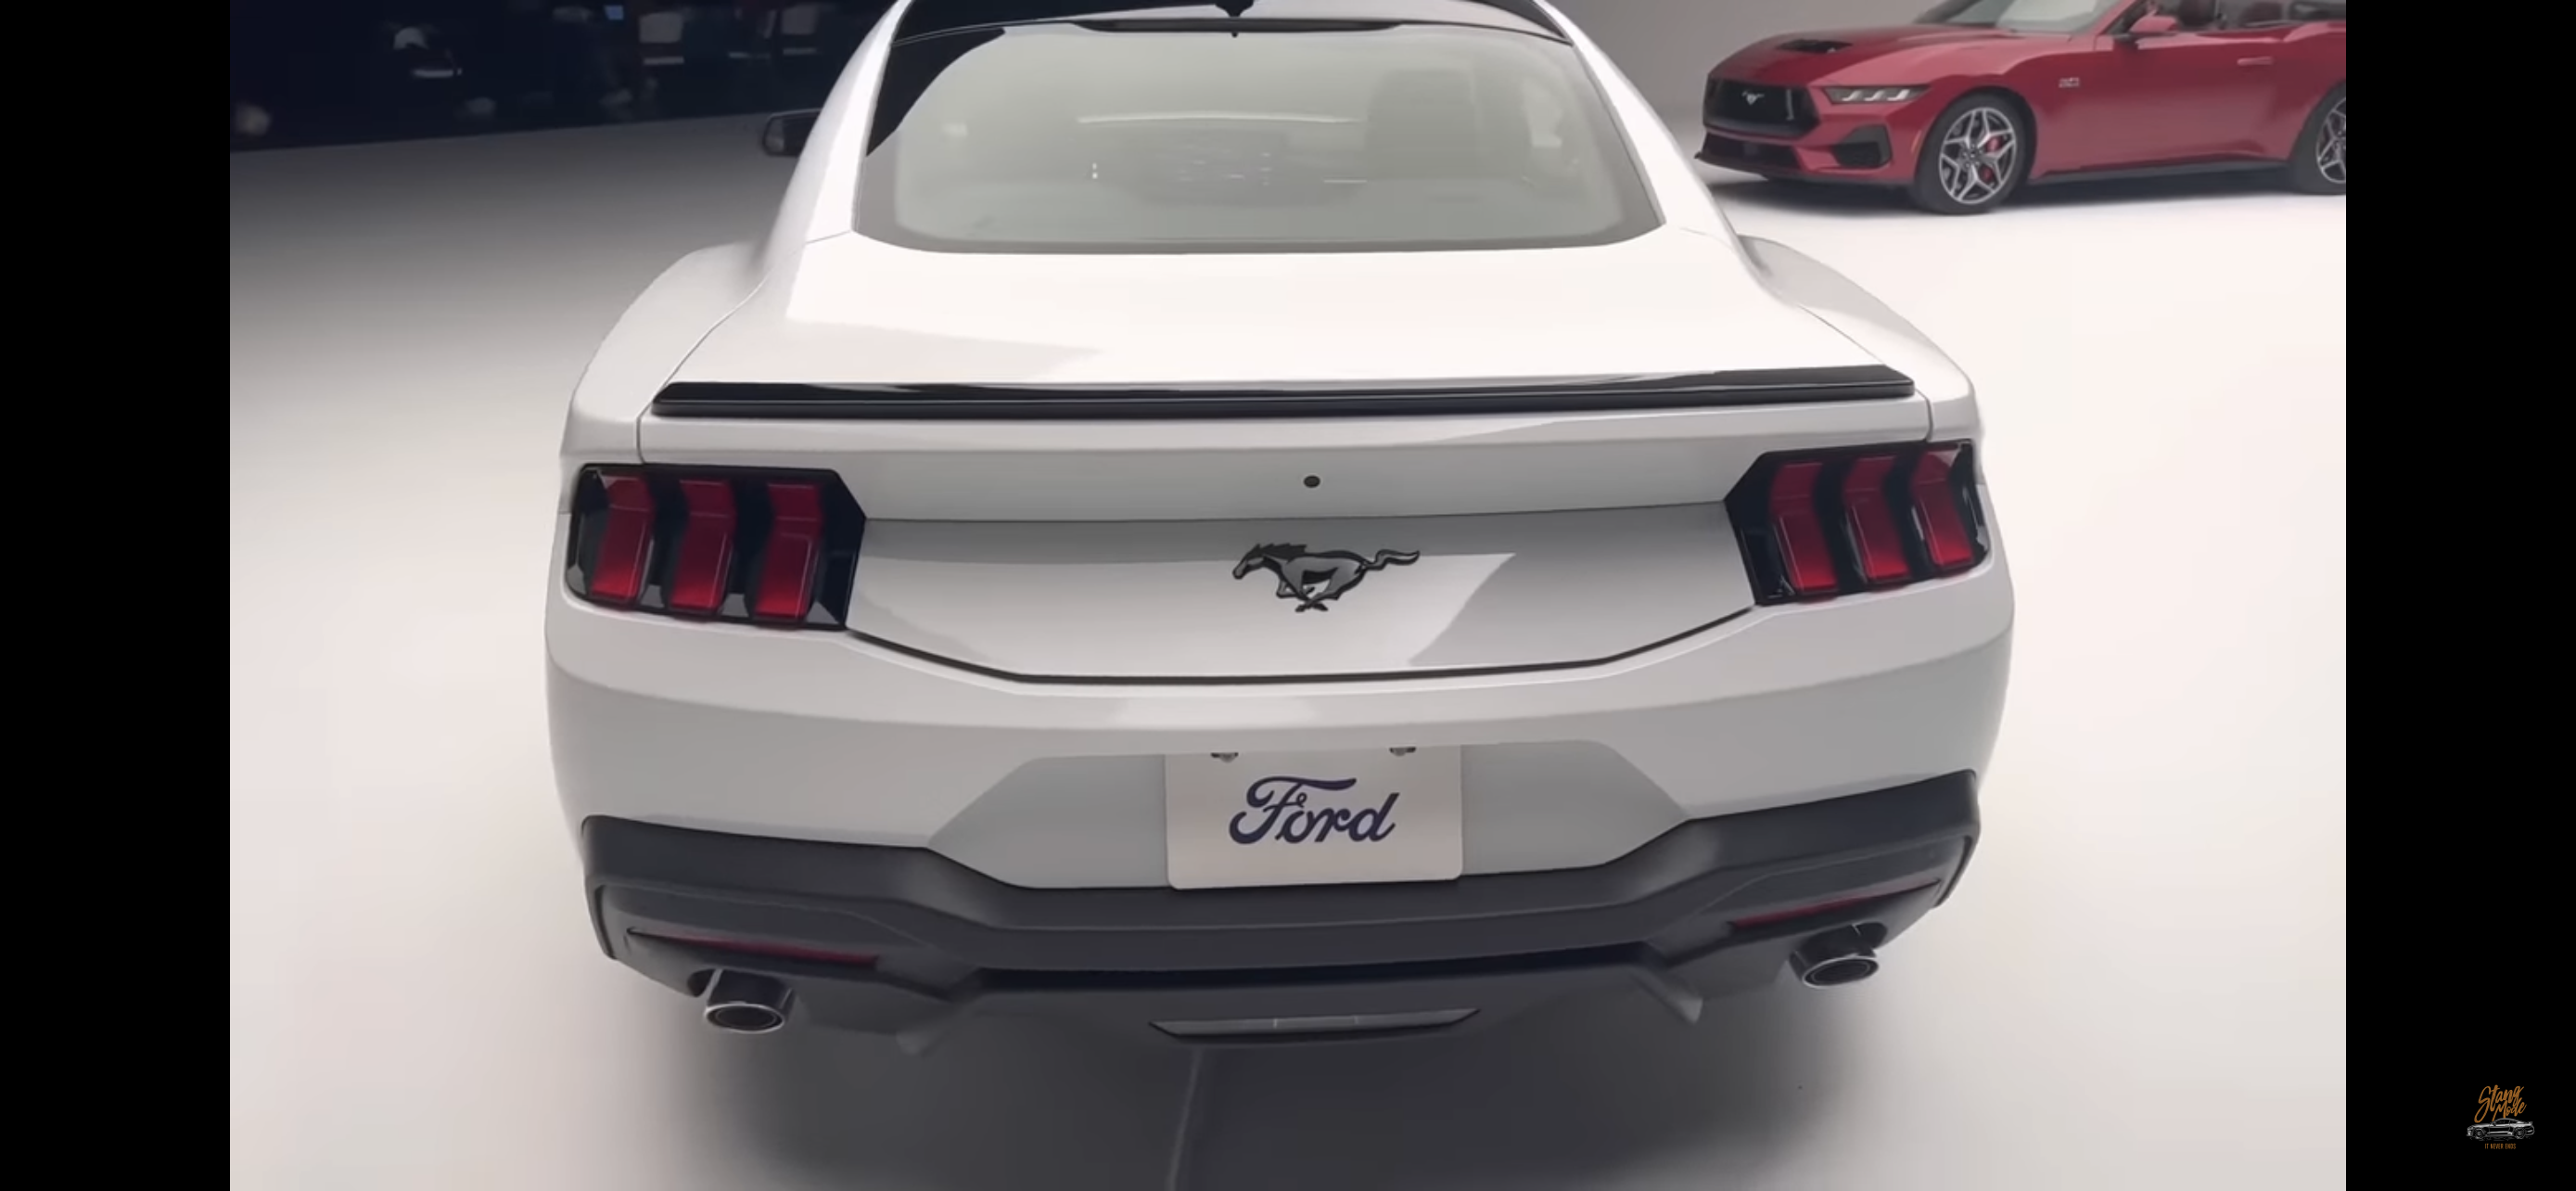 S650 Mustang Does anyone have a general idea what a "blade spoiler" will look like? My order sheet says blade spoiler but.... C3EBB4A5-CD0C-4A08-A646-9E2D30CA7134